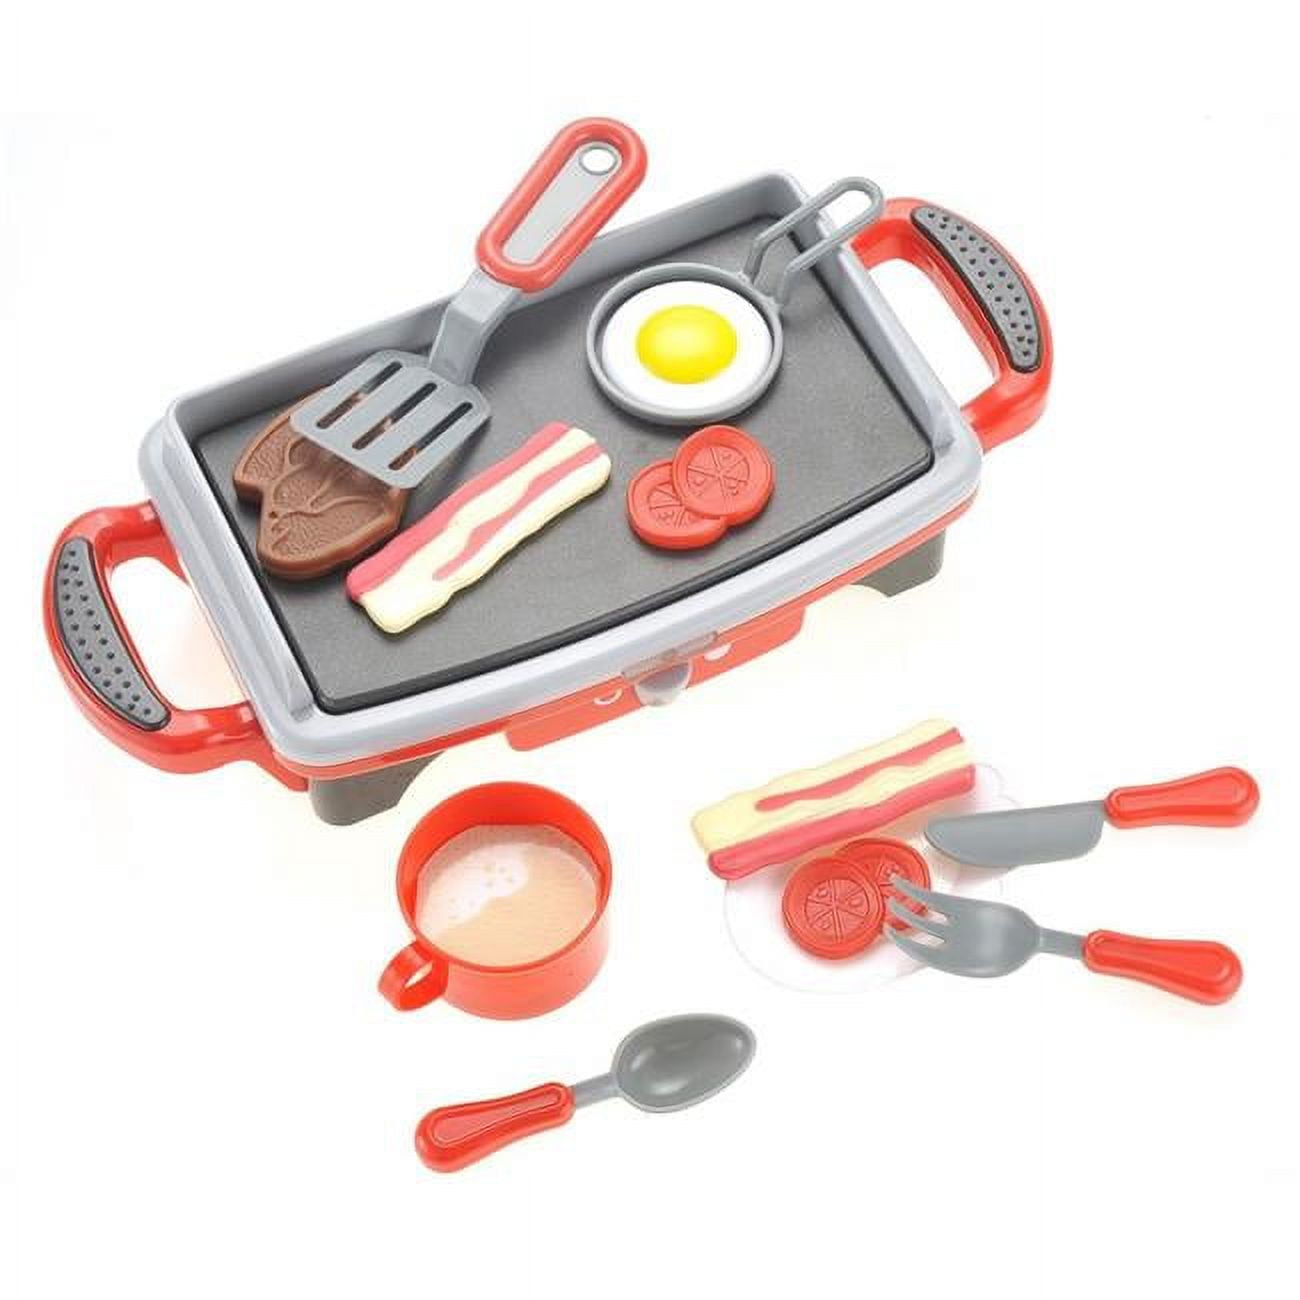 Picture of Azimport PS58 Breakfast Griddle Electric Stove Play Food Kitchen Grill Set for Kids